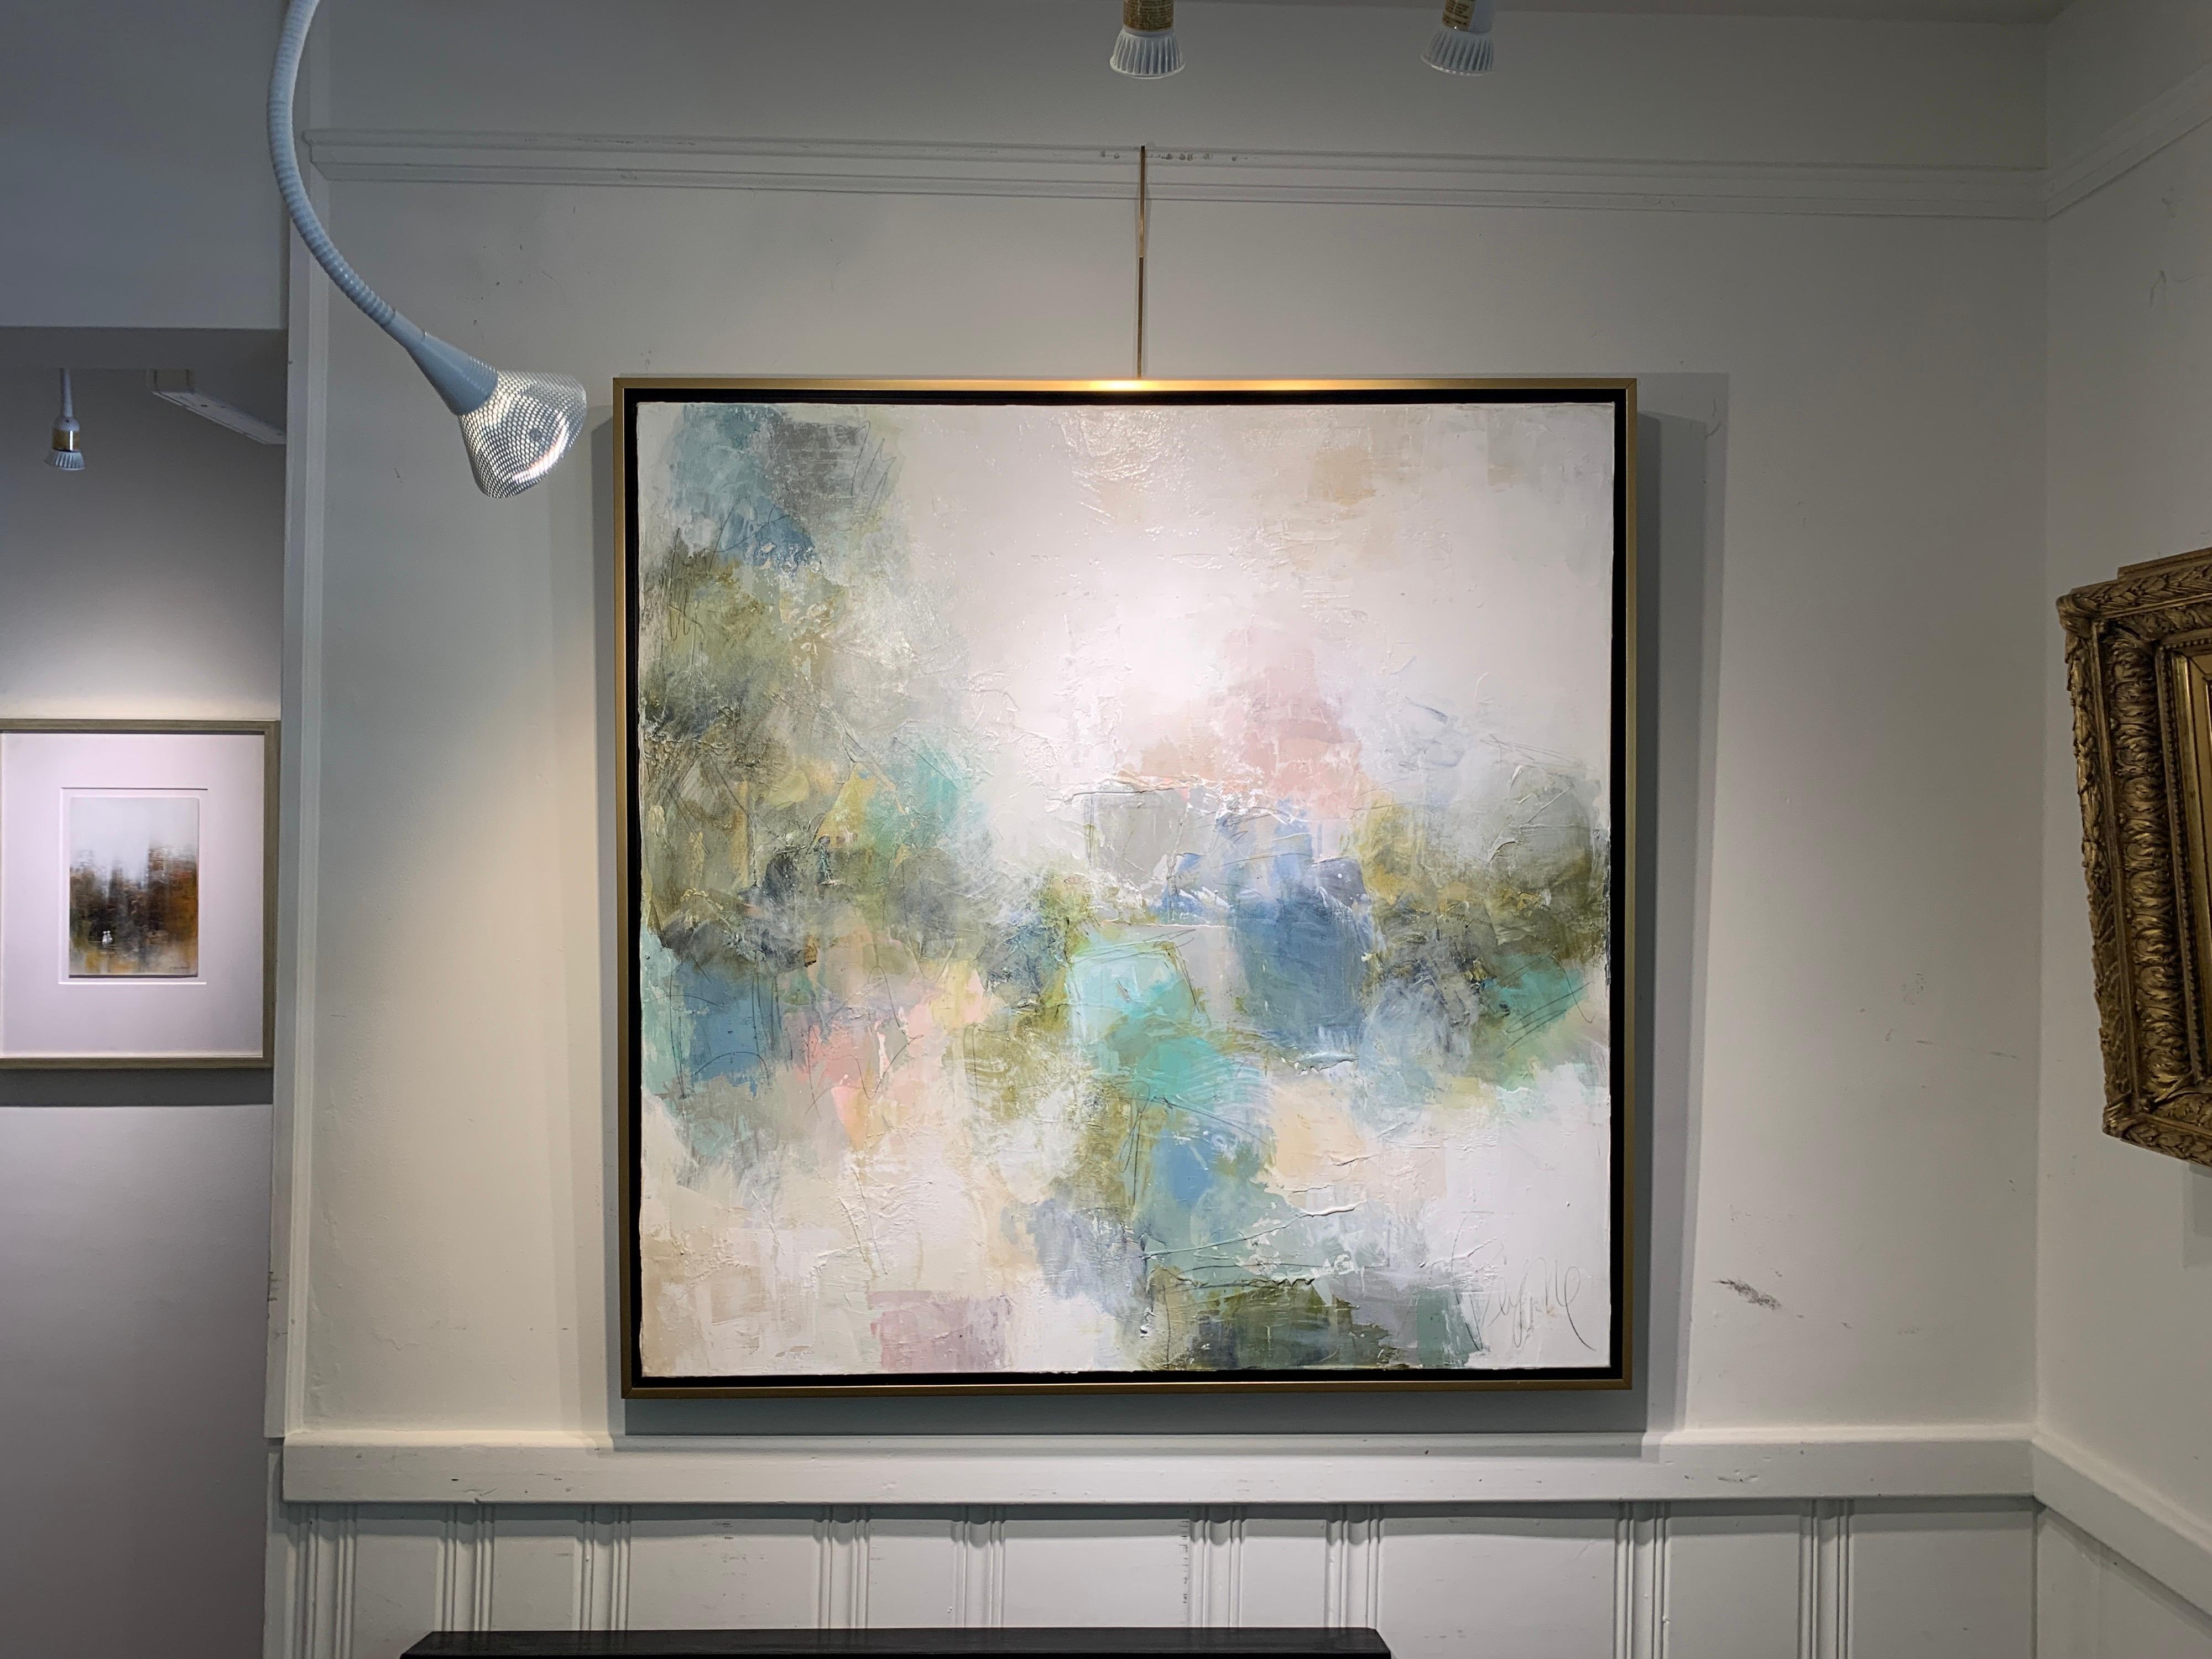 Heartbeat is a large size mixed media on canvas abstract painting of square format, created by American artist Melissa Payne Baker in 2020. Featuring a soft palette mostly made of cream, white, green, blue and pink playing beautifully with the white